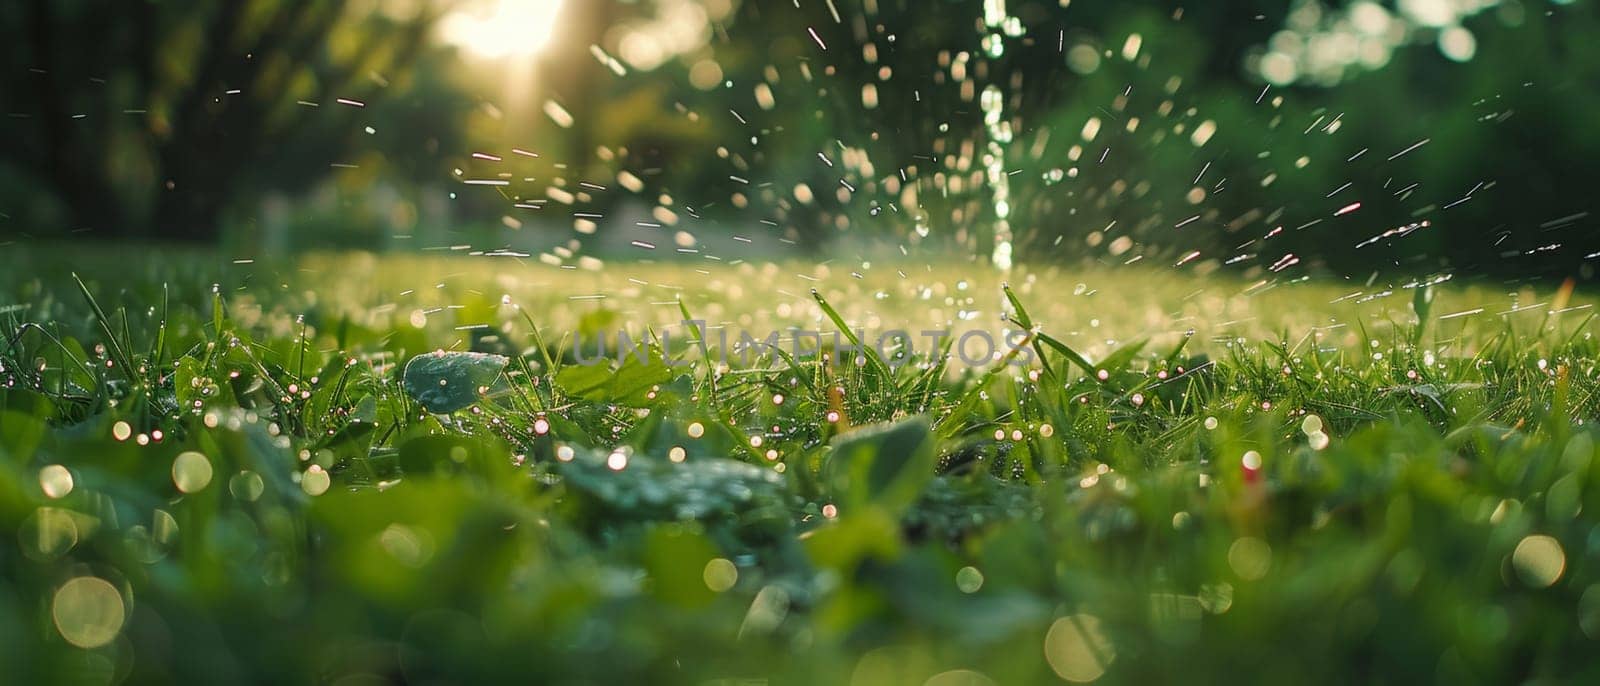 Water sprinkler spraying droplets on a vibrant green lawn with sunflare, symbolizing garden care and summer freshness. by sfinks